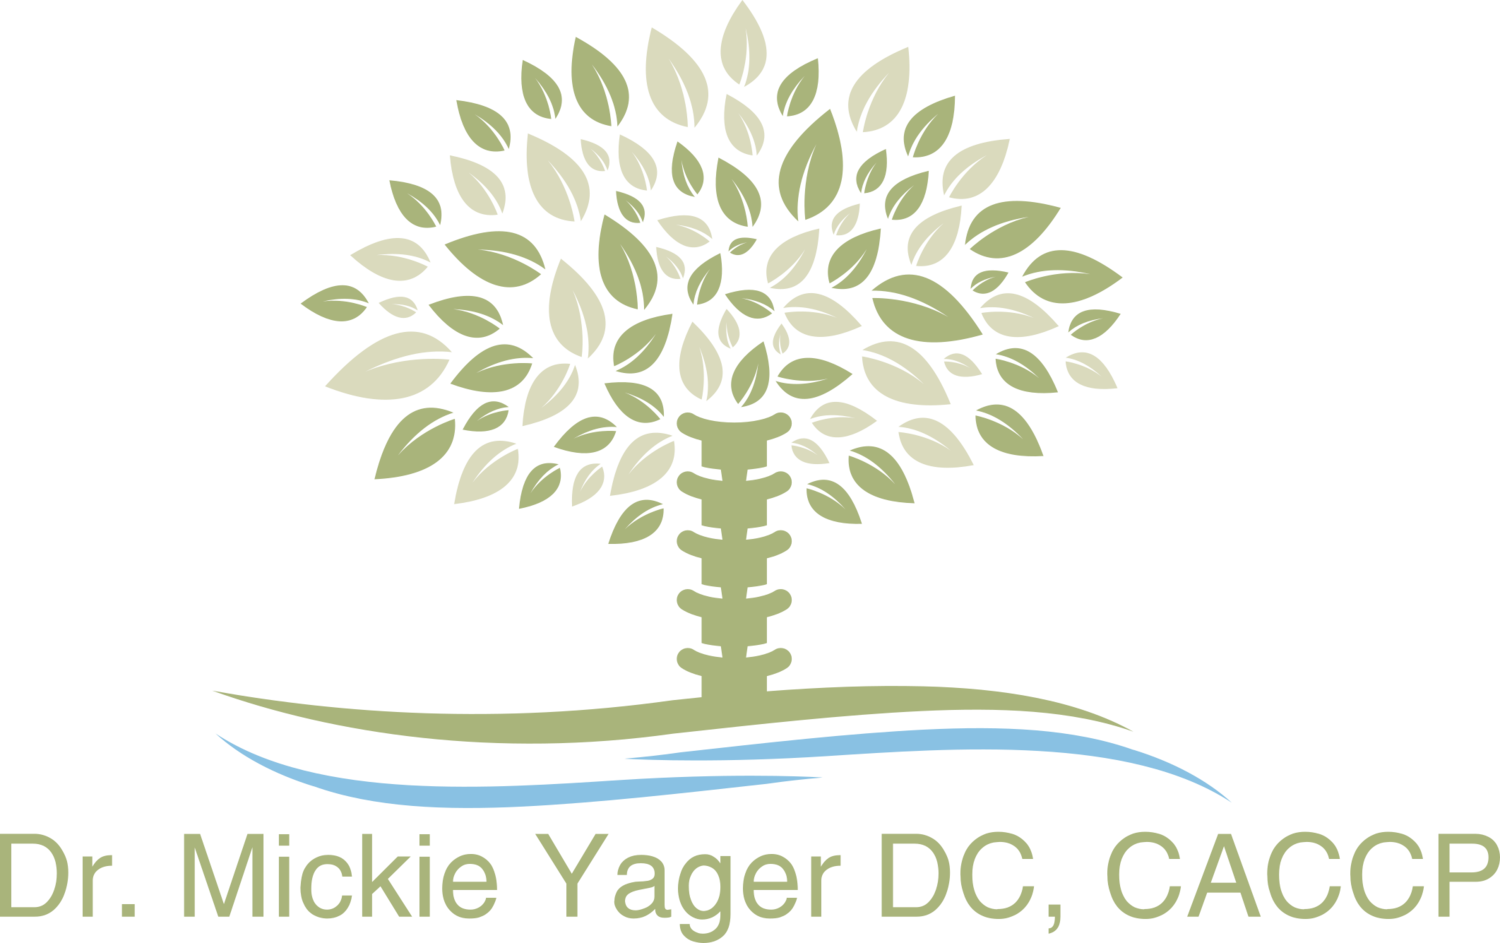 Dr. Mickie Yager D.C.,C.A.C.C.P